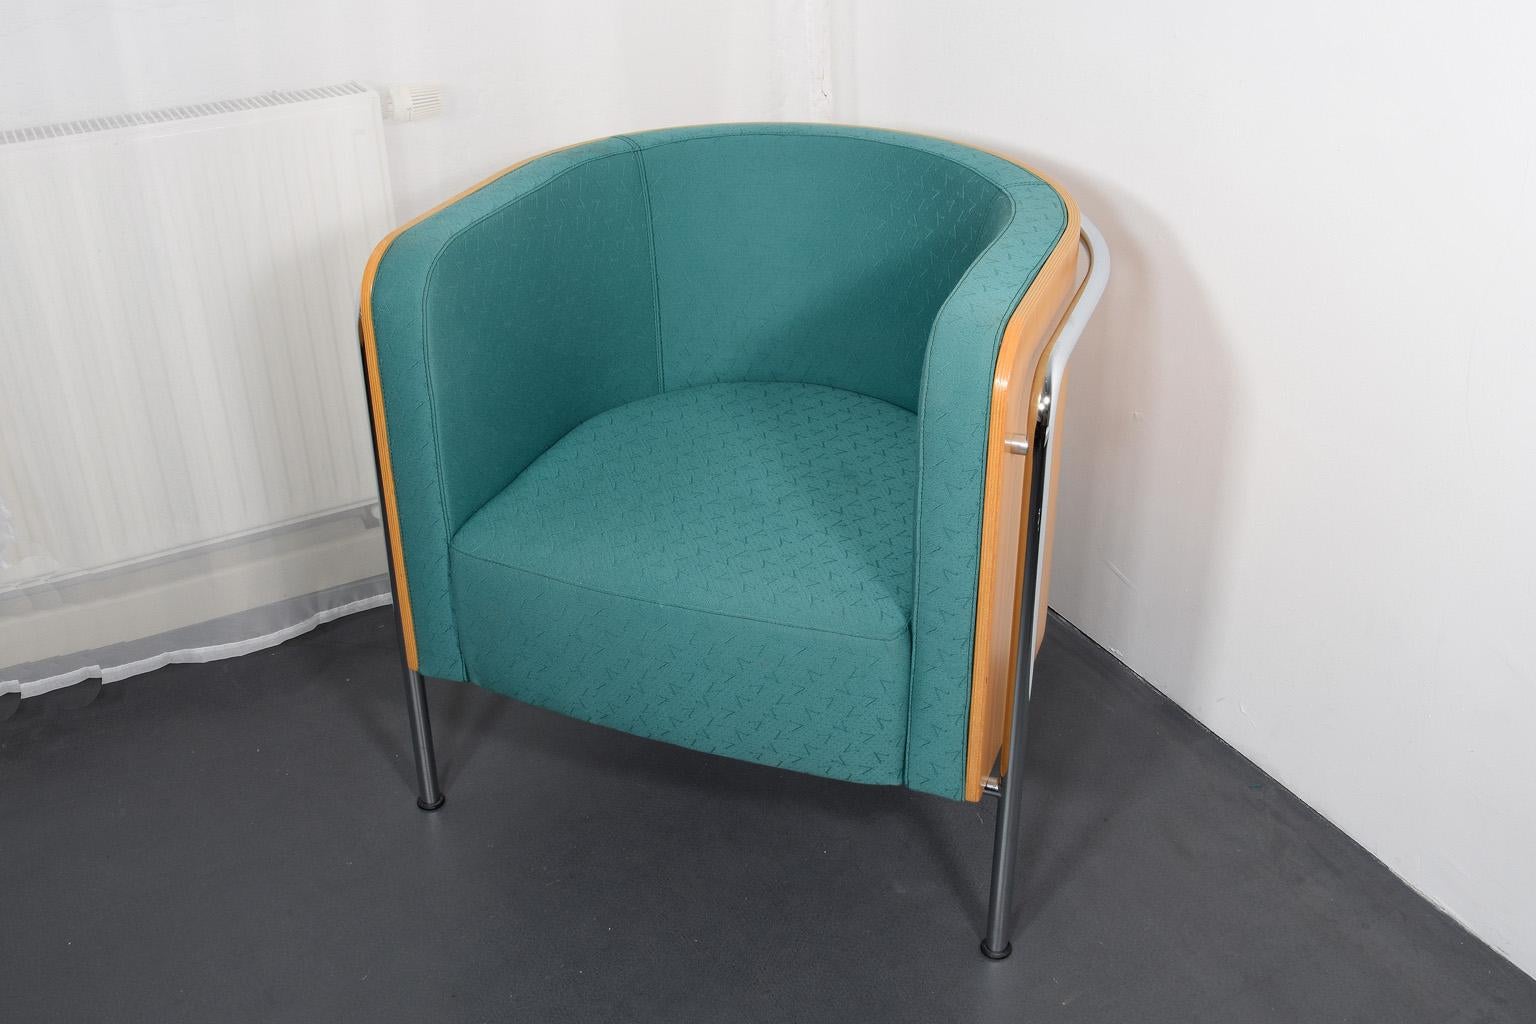 Mid-Century Modern Thonet Lounge Chair Modell S 3001 from Christoph Zschocke for Thonet, 1990 For Sale